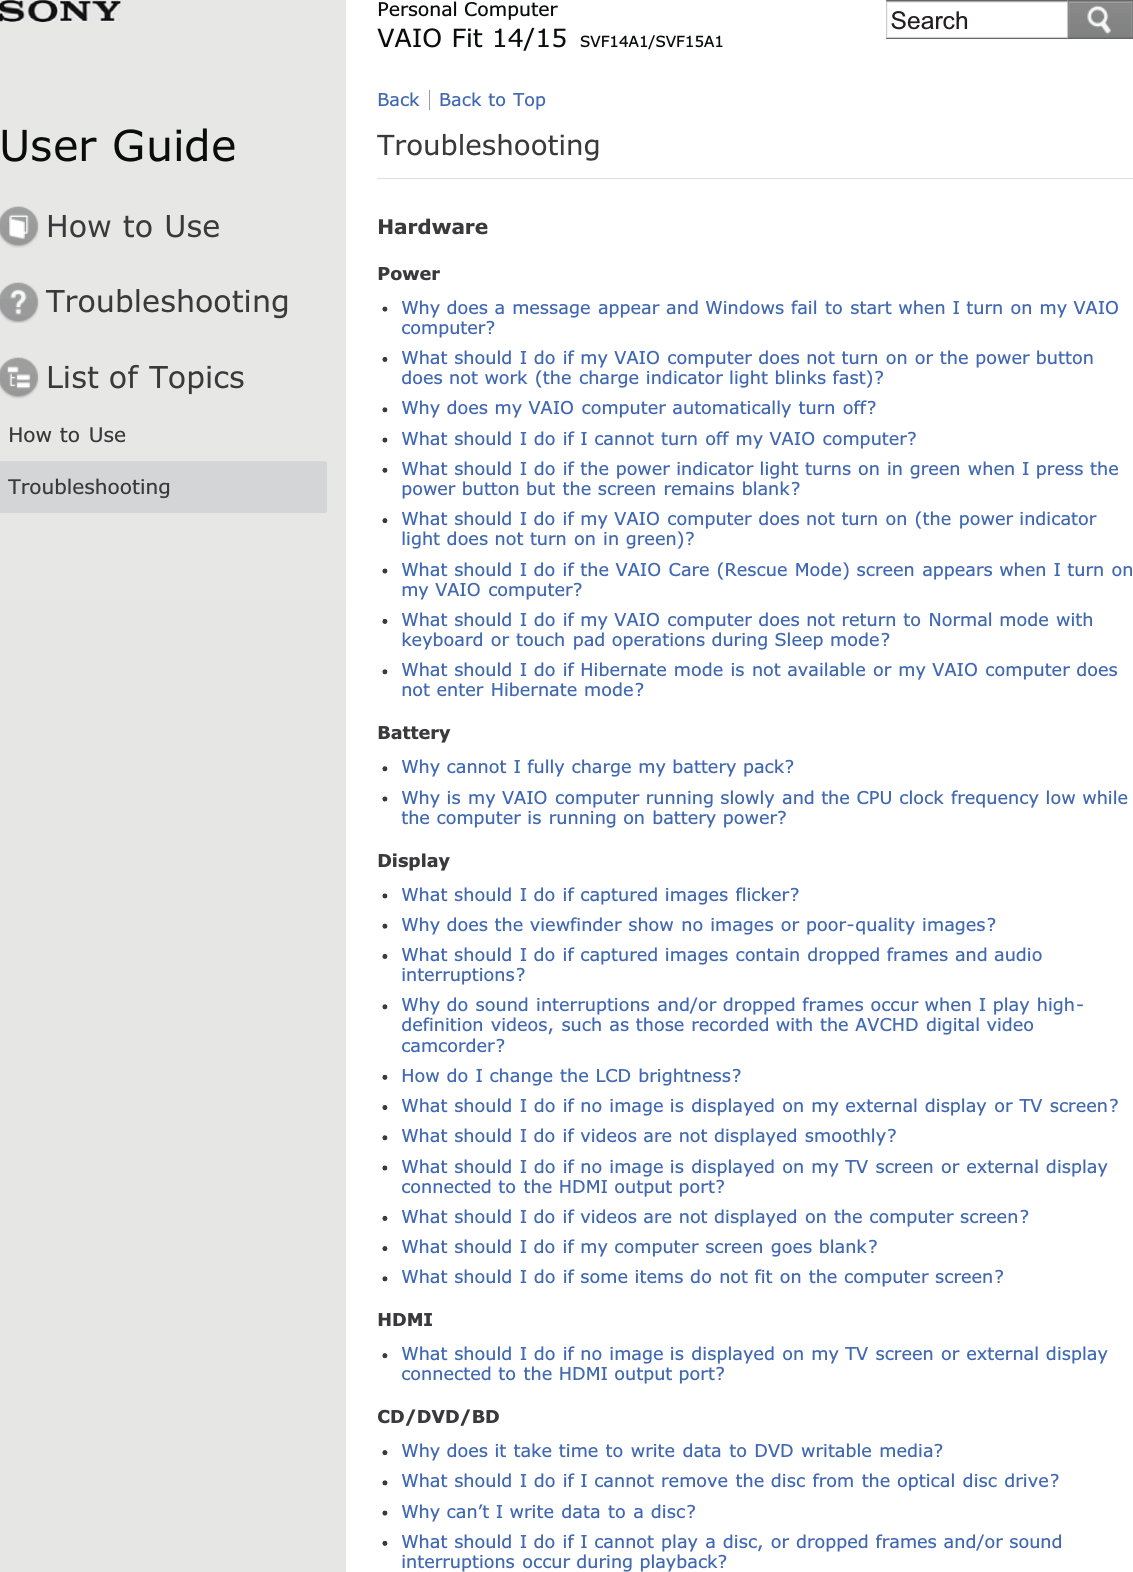 User GuideHow to UseTroubleshootingList of TopicsHow to UseTroubleshootingPersonal ComputerVAIO Fit 14/15 SVF14A1/SVF15A1TroubleshootingHardwarePowerWhy does a message appear and Windows fail to start when I turn on my VAIOcomputer?What should I do if my VAIO computer does not turn on or the power buttondoes not work (the charge indicator light blinks fast)?Why does my VAIO computer automatically turn off?What should I do if I cannot turn off my VAIO computer?What should I do if the power indicator light turns on in green when I press thepower button but the screen remains blank?What should I do if my VAIO computer does not turn on (the power indicatorlight does not turn on in green)?What should I do if the VAIO Care (Rescue Mode) screen appears when I turn onmy VAIO computer?What should I do if my VAIO computer does not return to Normal mode withkeyboard or touch pad operations during Sleep mode?What should I do if Hibernate mode is not available or my VAIO computer doesnot enter Hibernate mode?BatteryWhy cannot I fully charge my battery pack?Why is my VAIO computer running slowly and the CPU clock frequency low whilethe computer is running on battery power?DisplayWhat should I do if captured images flicker?Why does the viewfinder show no images or poor-quality images?What should I do if captured images contain dropped frames and audiointerruptions?Why do sound interruptions and/or dropped frames occur when I play high-definition videos, such as those recorded with the AVCHD digital videocamcorder?How do I change the LCD brightness?What should I do if no image is displayed on my external display or TV screen?What should I do if videos are not displayed smoothly?What should I do if no image is displayed on my TV screen or external displayconnected to the HDMI output port?What should I do if videos are not displayed on the computer screen?What should I do if my computer screen goes blank?What should I do if some items do not fit on the computer screen?HDMIWhat should I do if no image is displayed on my TV screen or external displayconnected to the HDMI output port?CD/DVD/BDWhy does it take time to write data to DVD writable media?What should I do if I cannot remove the disc from the optical disc drive?Why can’t I write data to a disc?What should I do if I cannot play a disc, or dropped frames and/or soundinterruptions occur during playback?Back Back to TopSearch